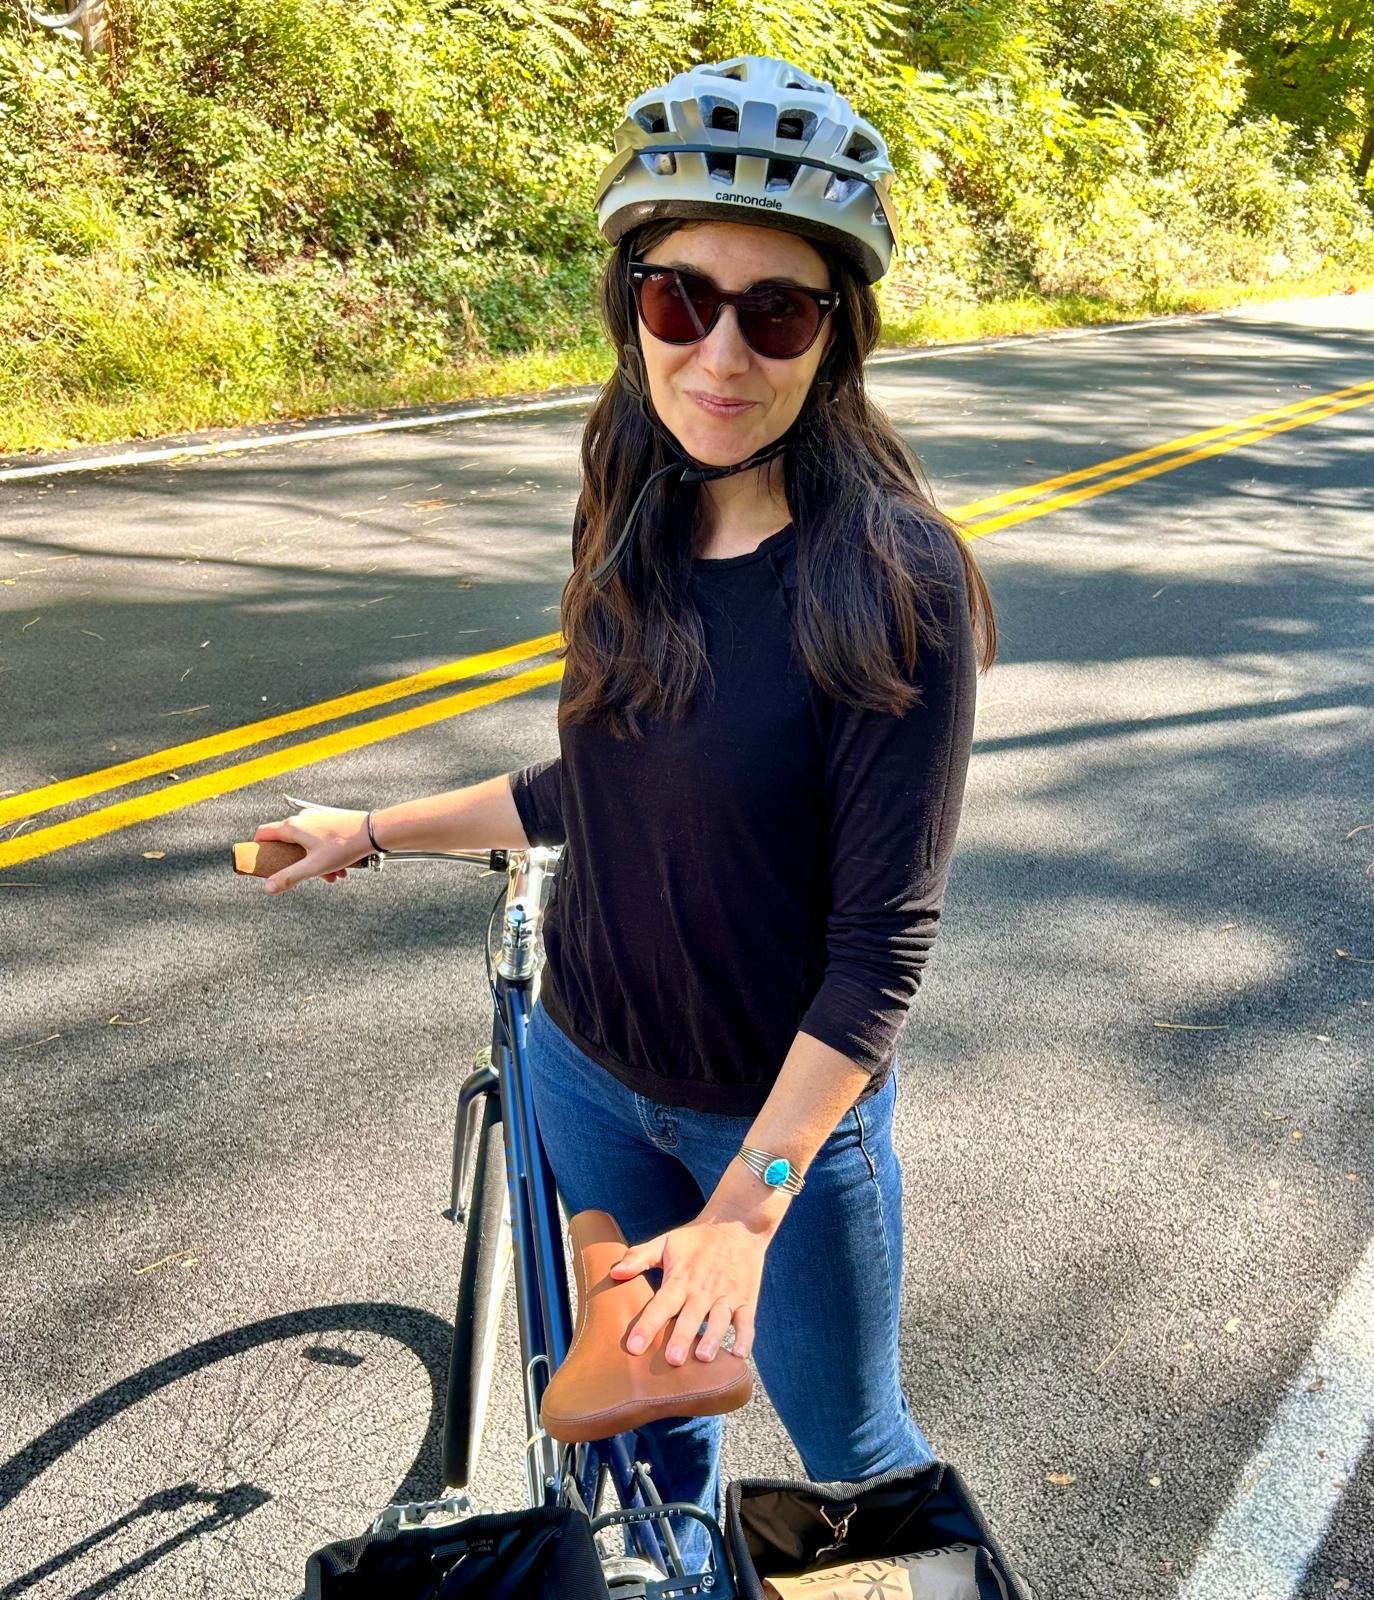 Did you know that Friday May 17th was ride your bike to work day? 🚴⛅🌳 You can find our fabulous art therapist Kelley riding her bike to work at our Cold Spring location when it is nice out! Do you ride your bike to work? Comment below! #rideyourbik